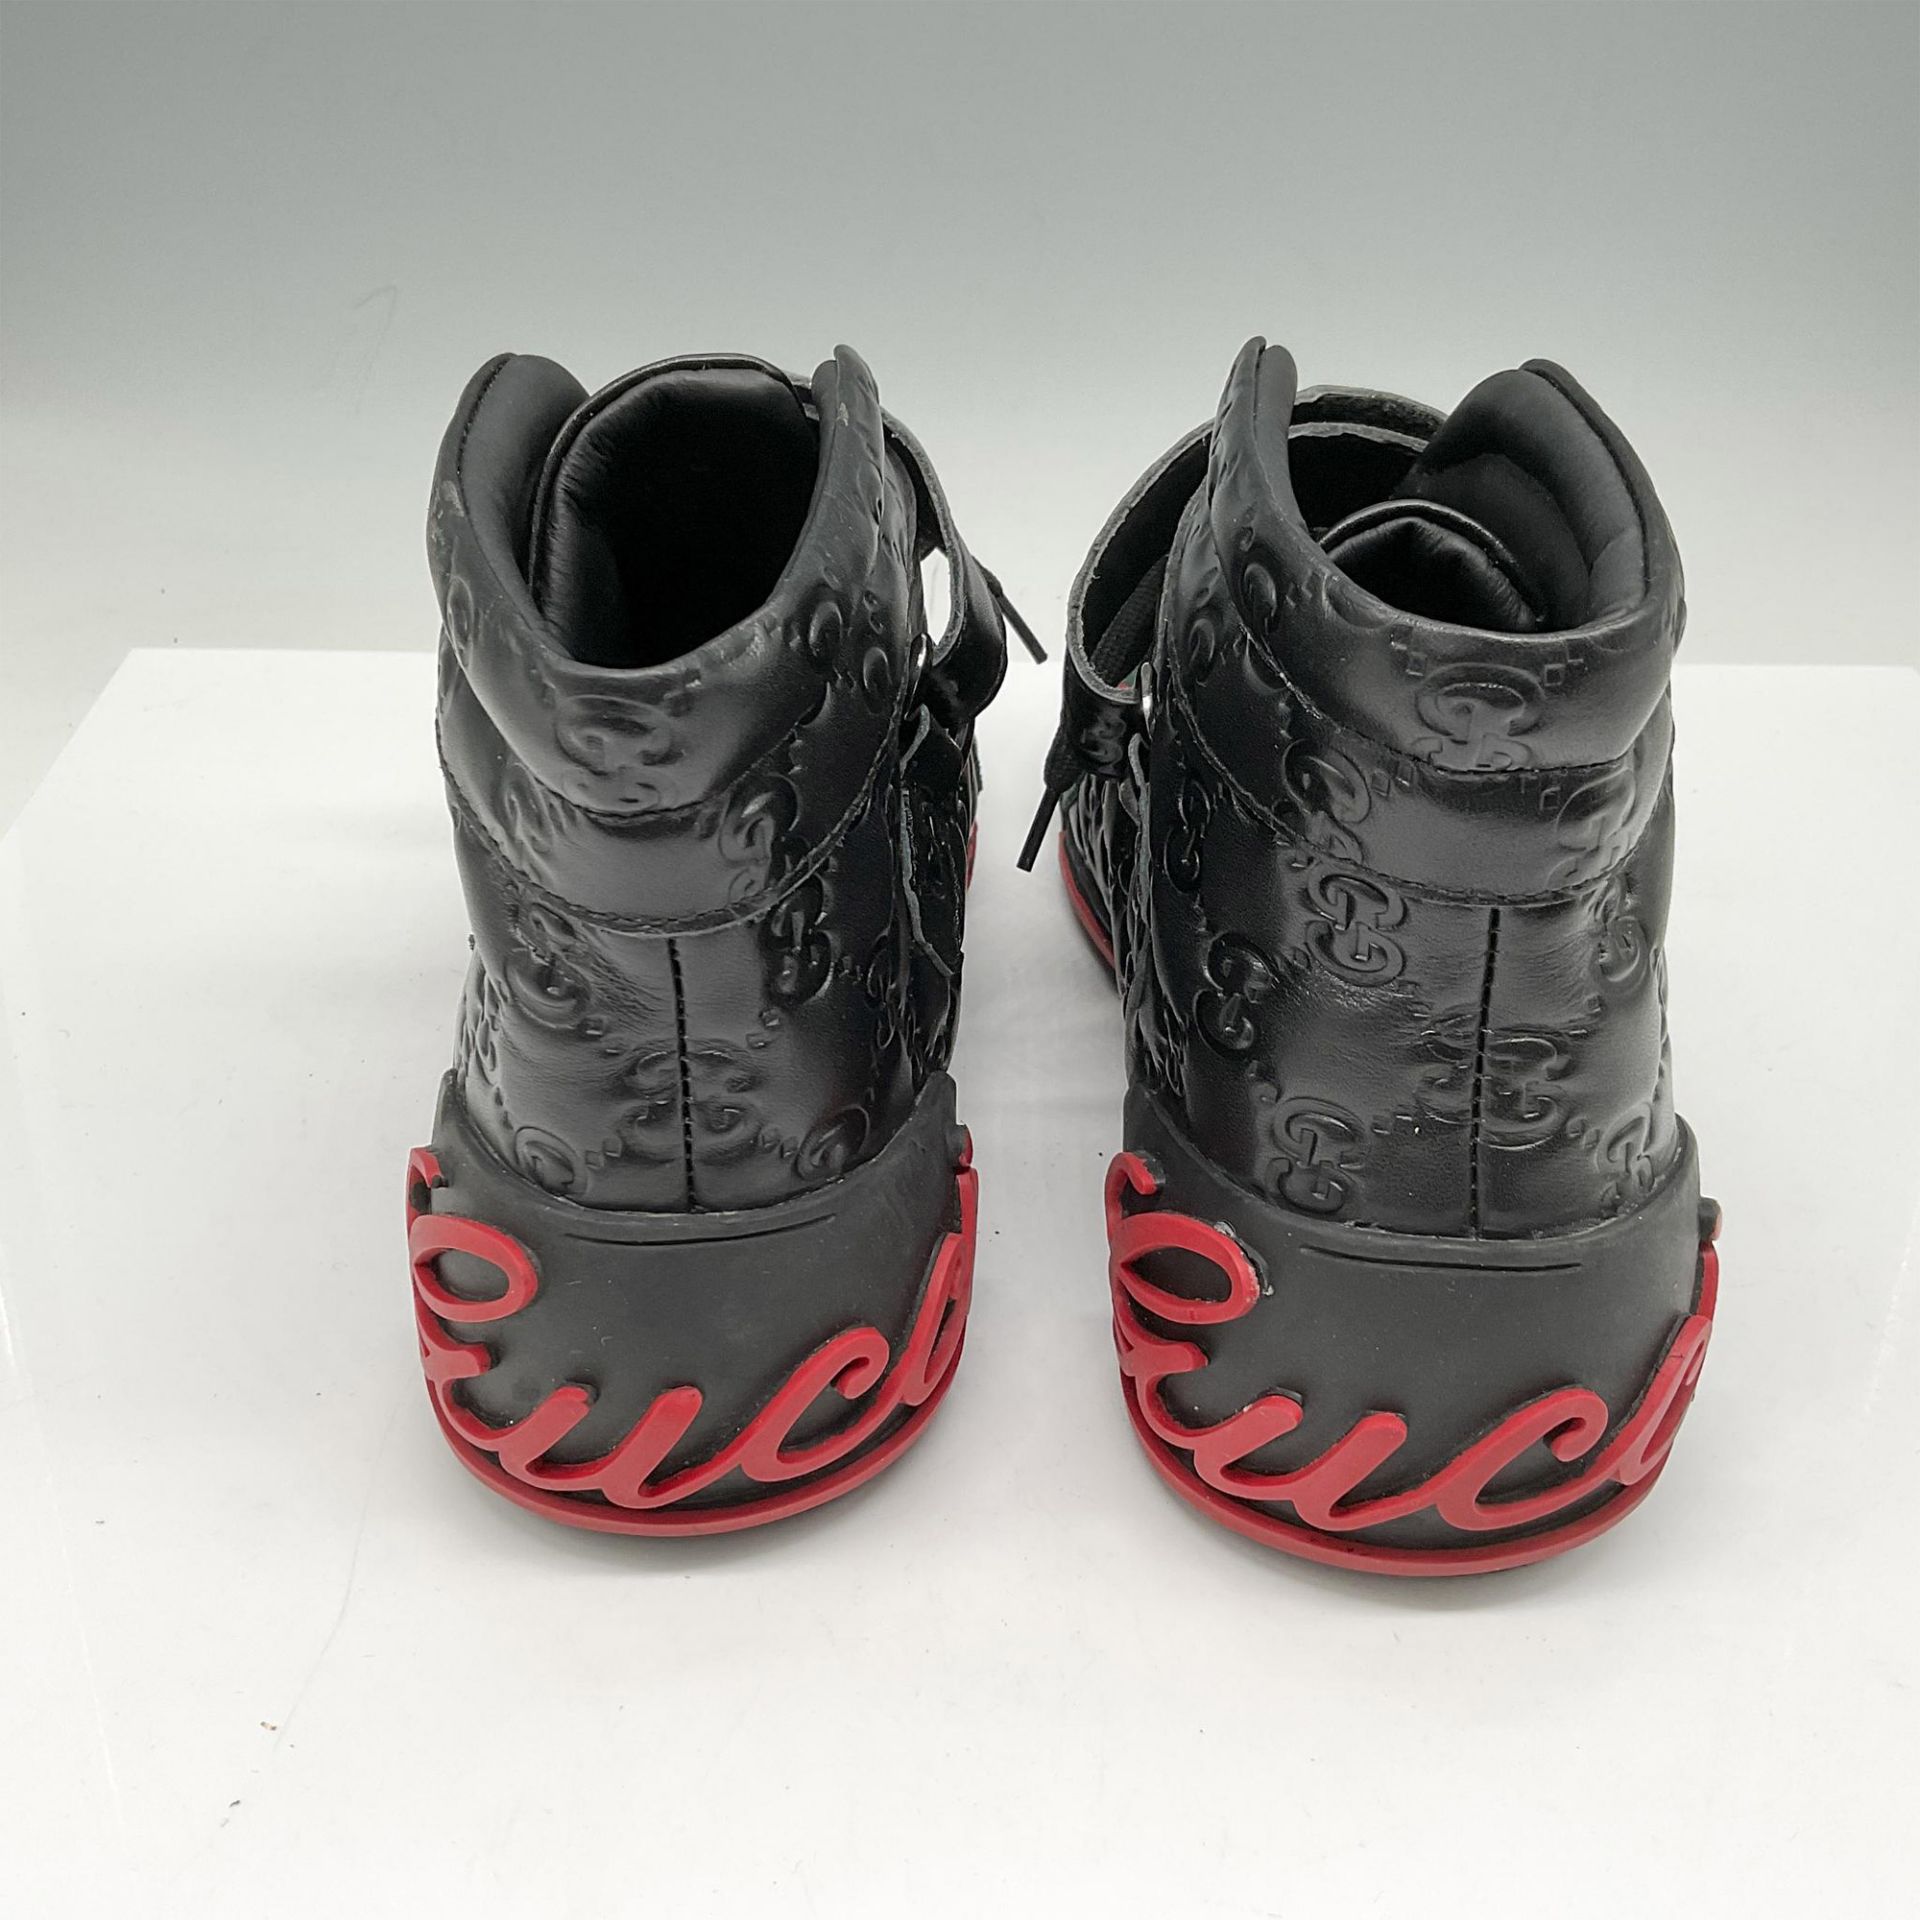 Gucci High Top Sneakers, Off The Grid, Size 39/8 - Image 5 of 5